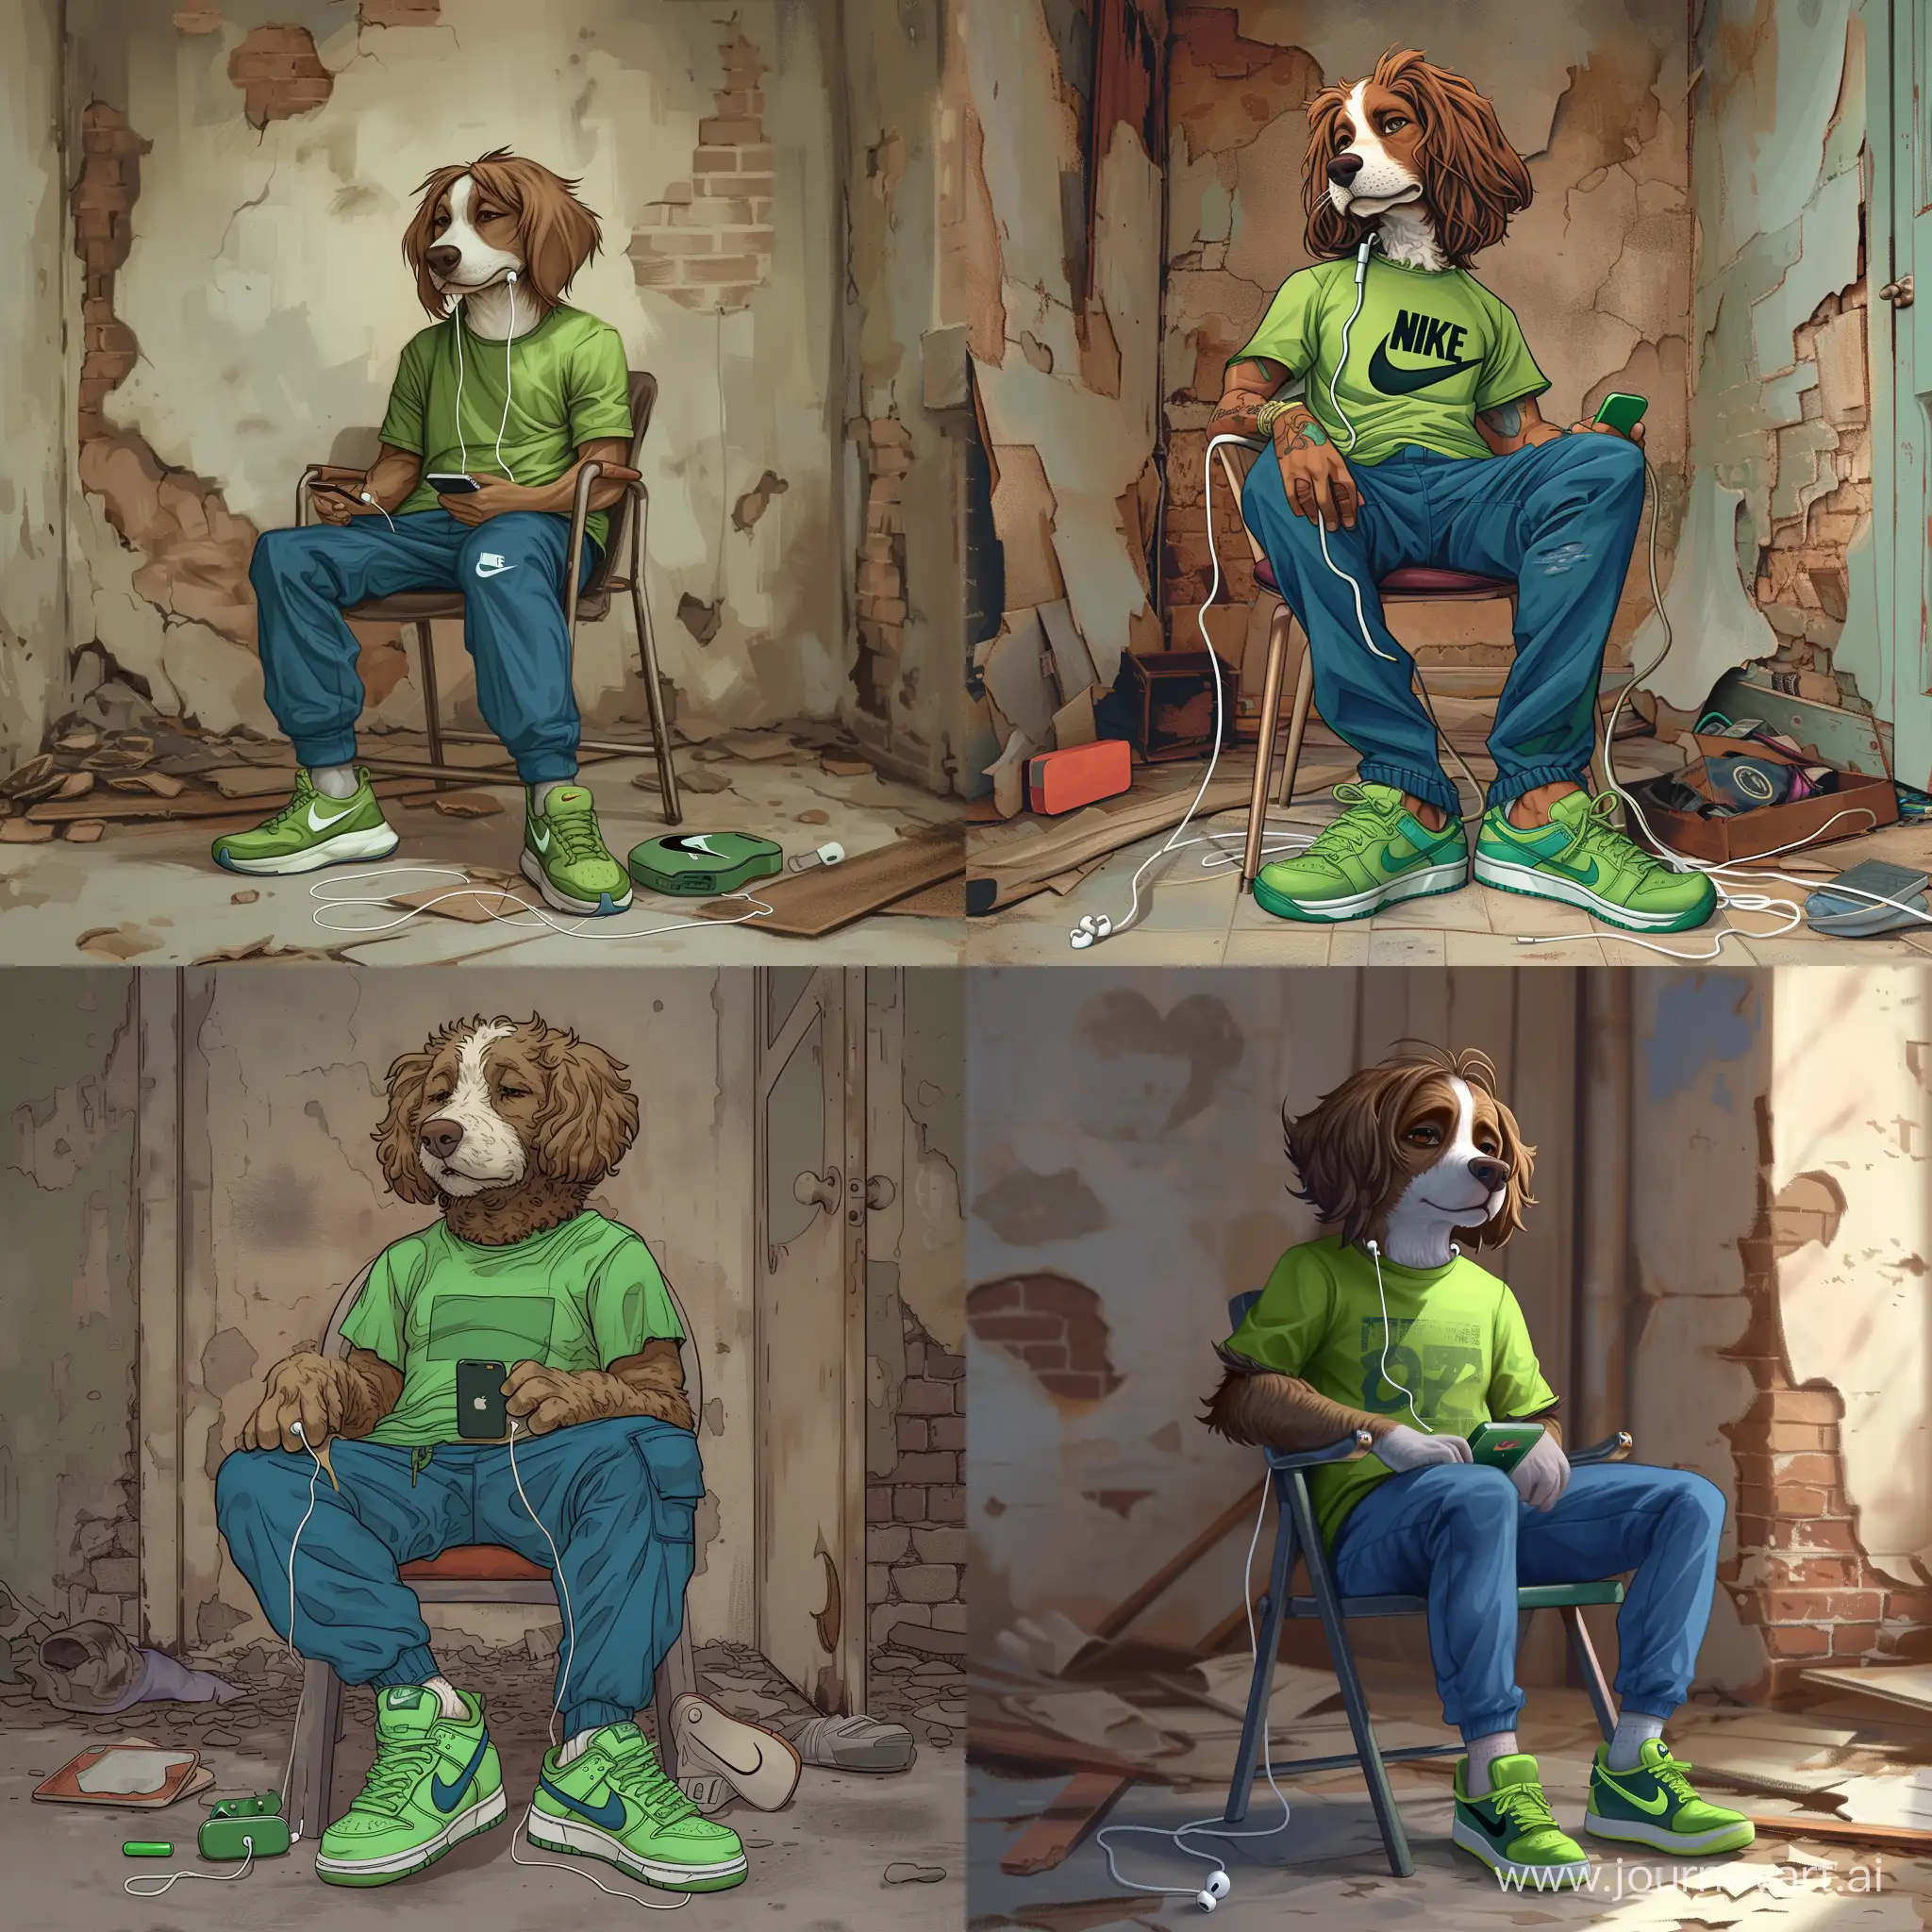 make a dog with green tshirt, blue pants brown hair and airpods and mobilephone. He have green nike shoes and he are sitting and chilling on a chair in a emty room